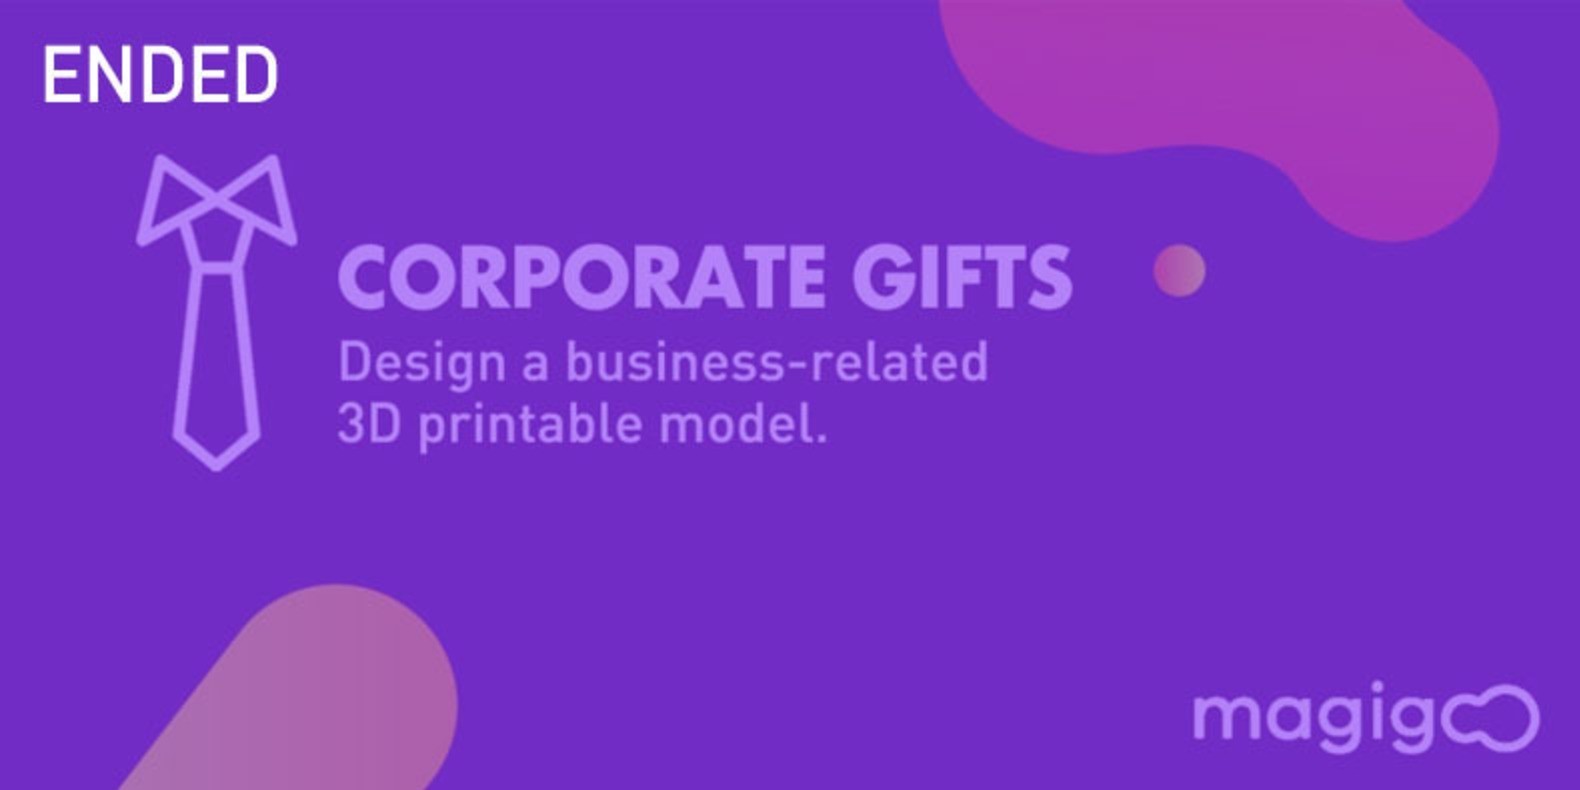 Design a 3D printable Corporate Gift, an object we can offer in a business relationship